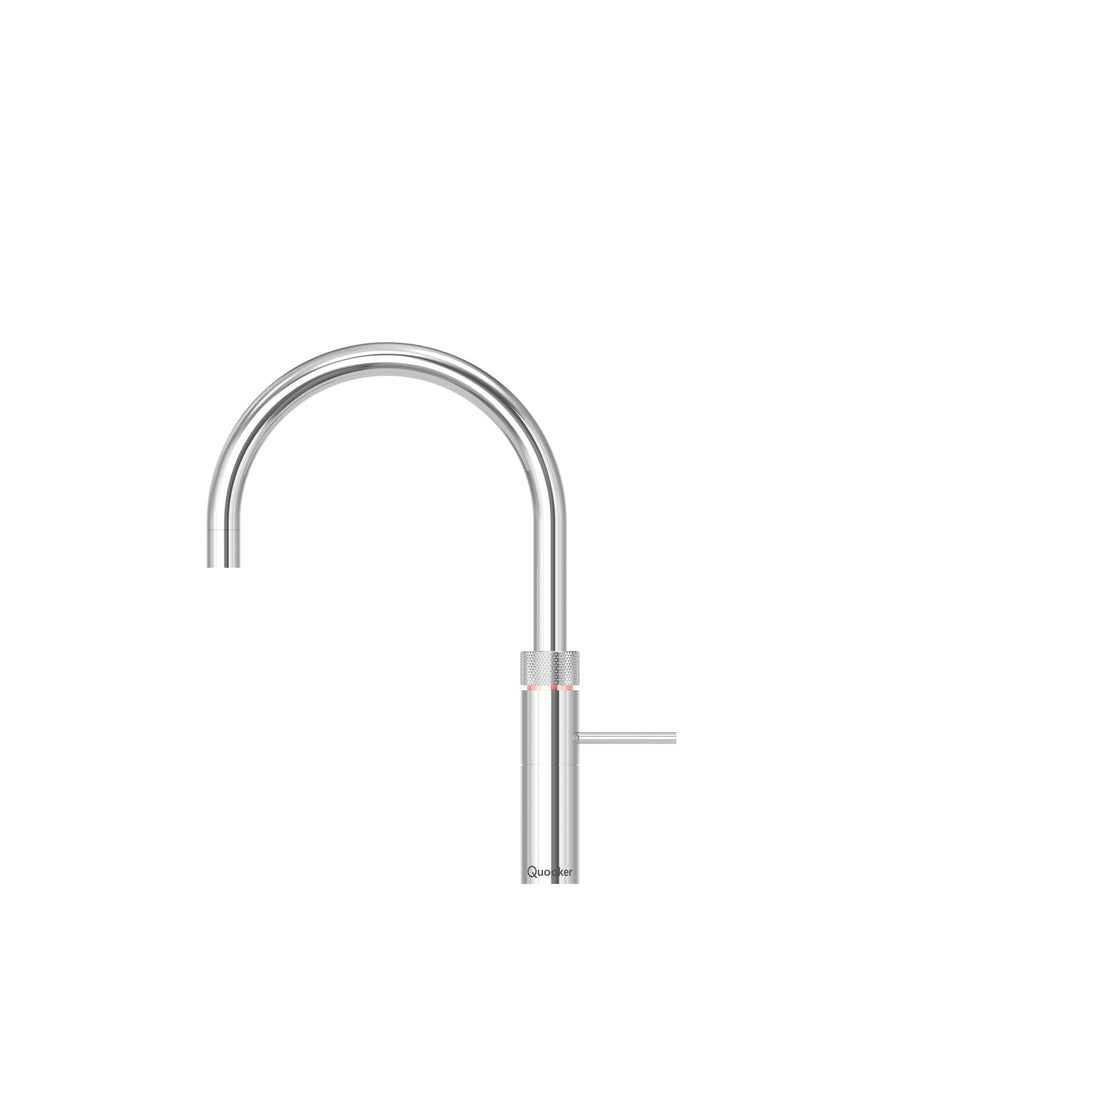 Quooker Fusion Round Tap finished in chrome.